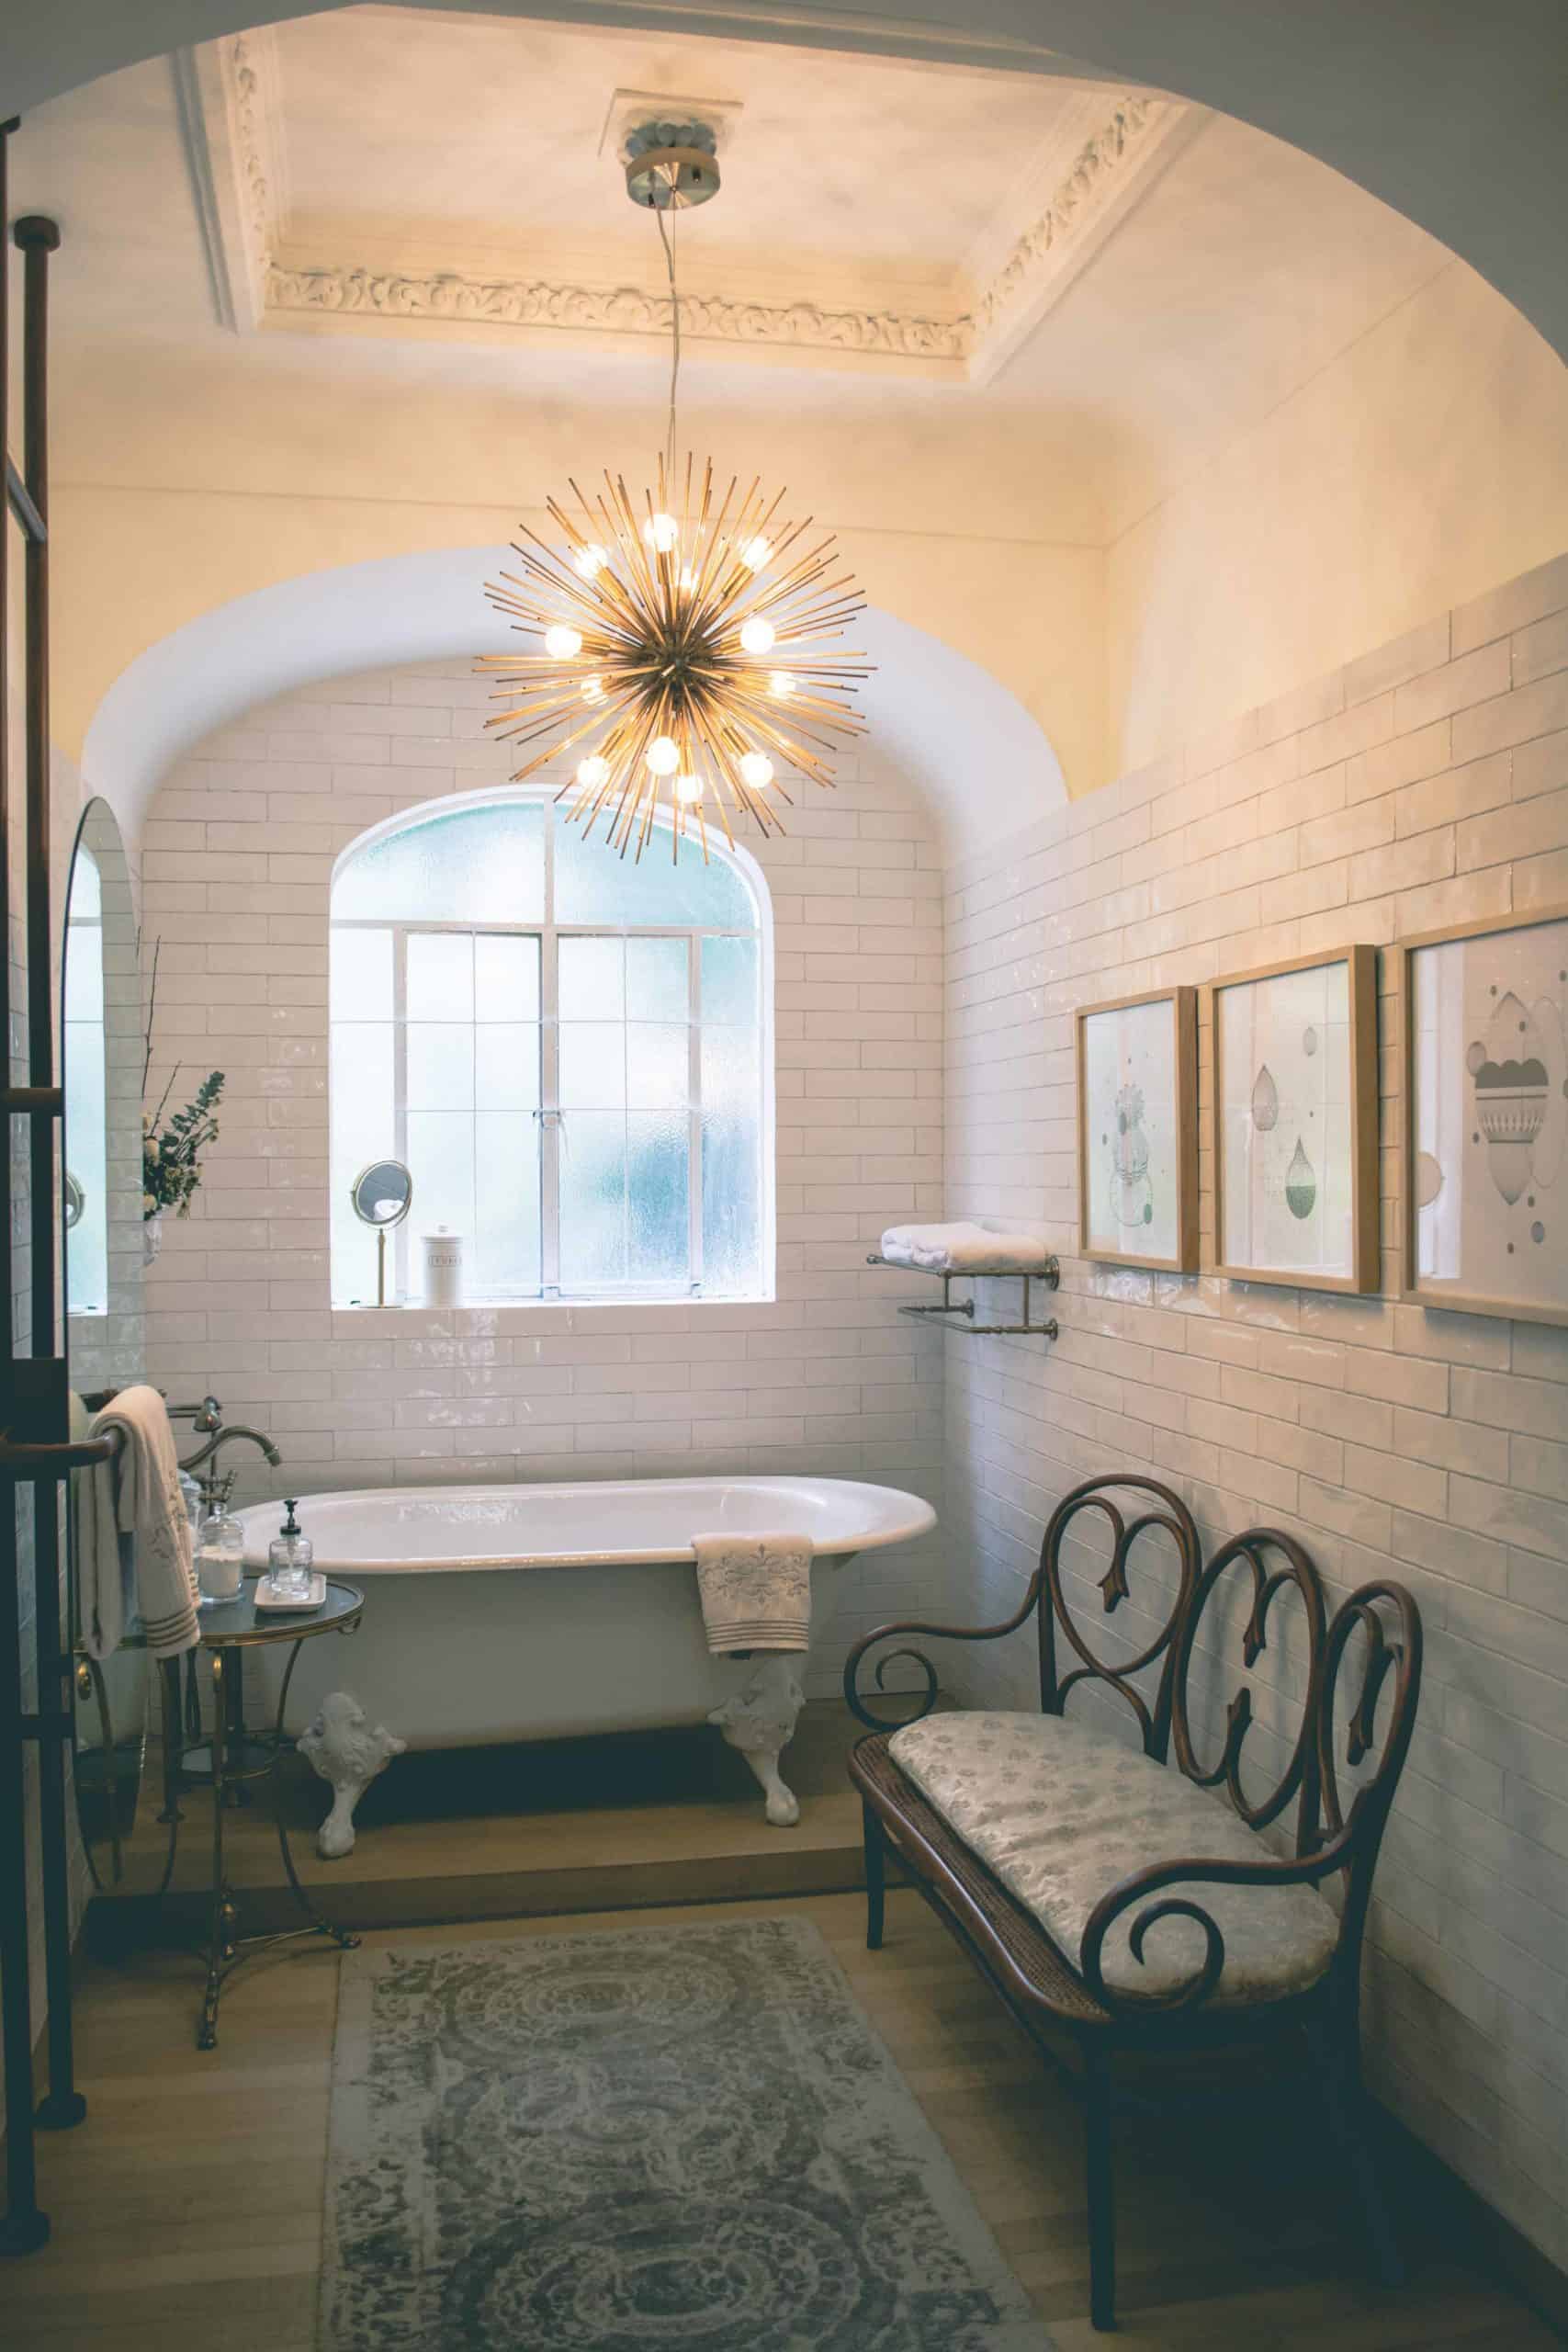 Bathroom with claw foot tub and spike chandelier with tile walls